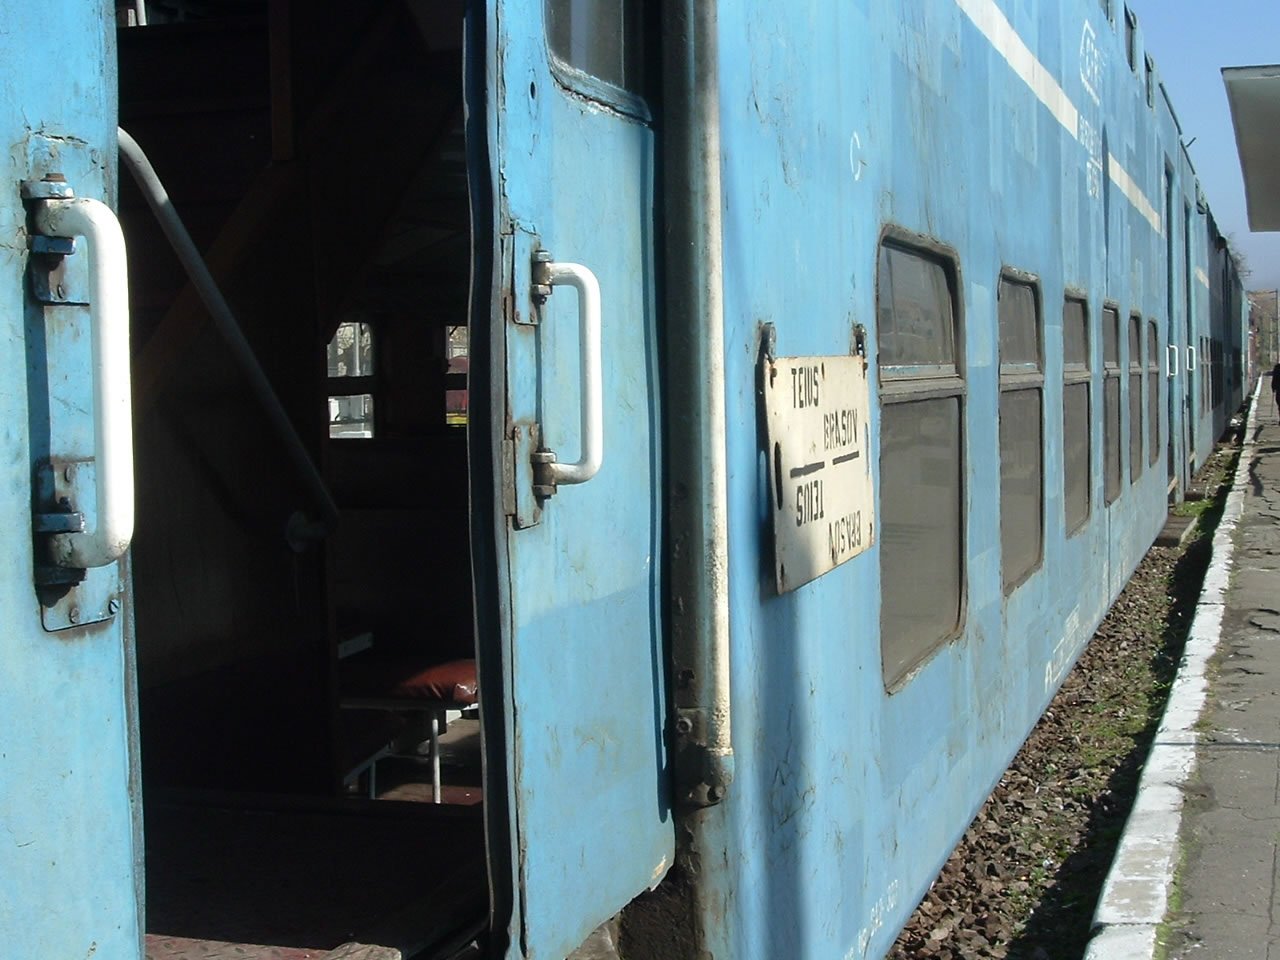 a train is blue with signs on the door